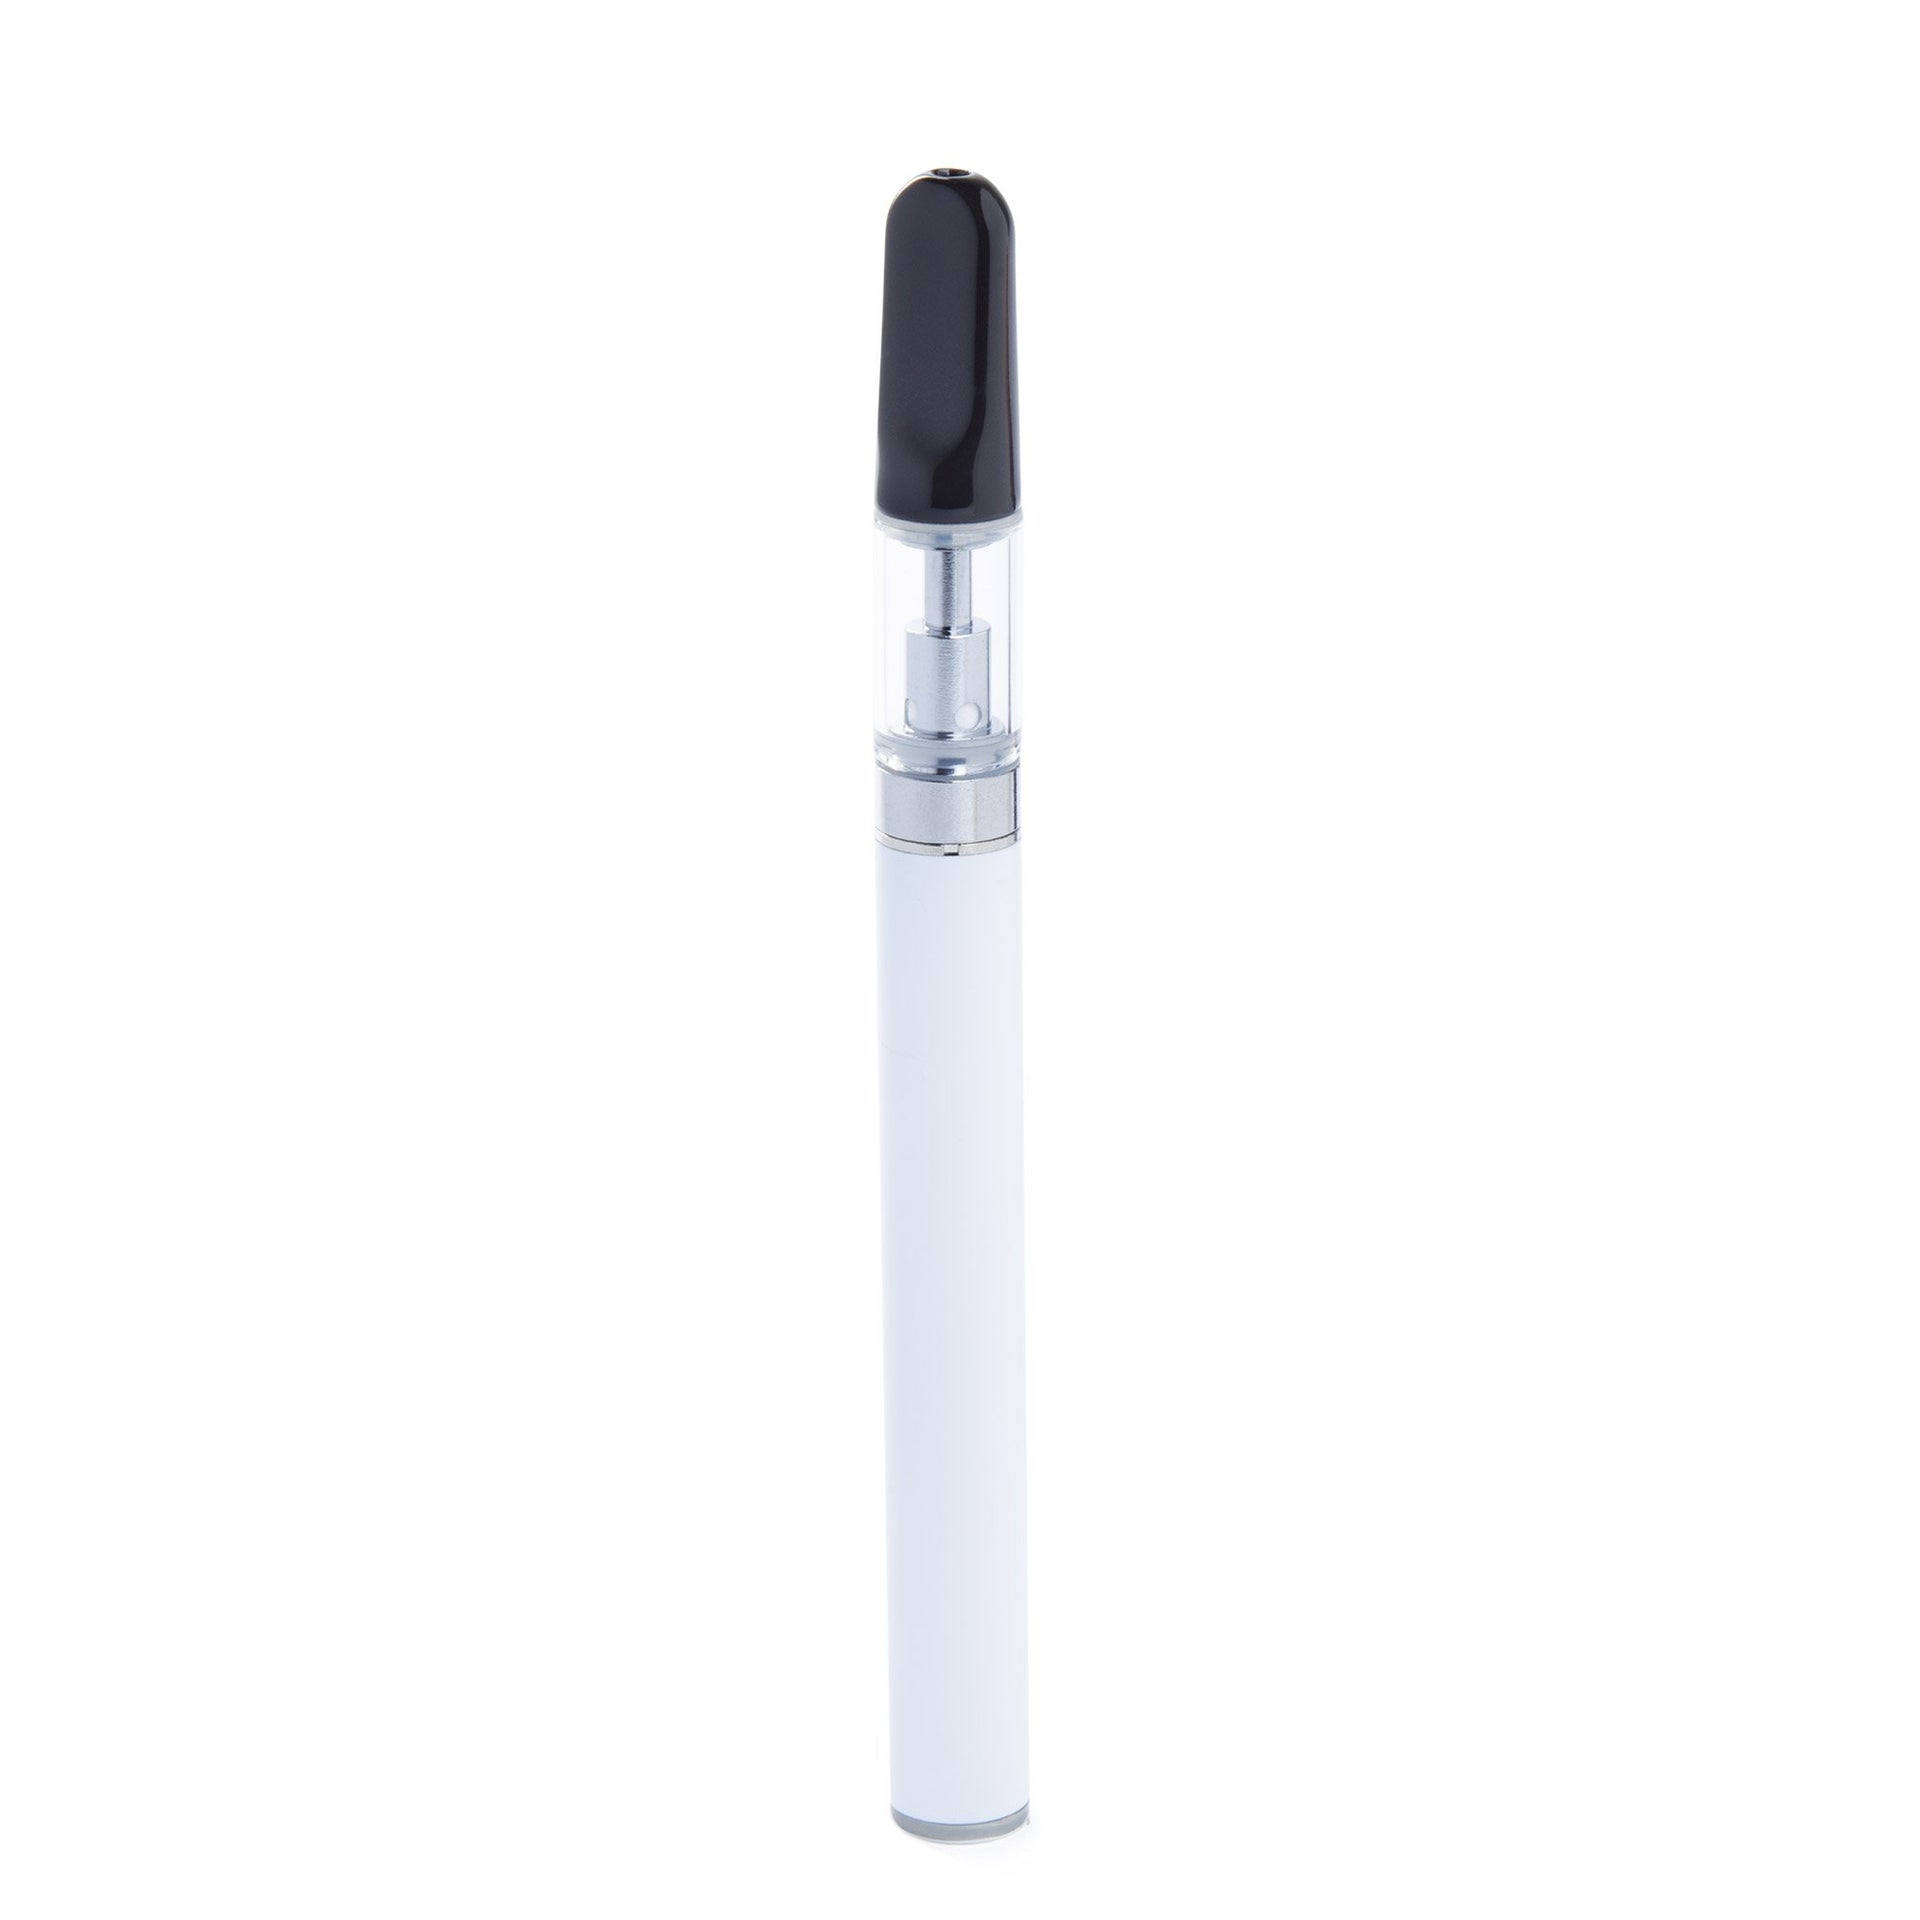 CCell M3 Cartridge Vape Battery - 420 Science - The most trusted online smoke shop.